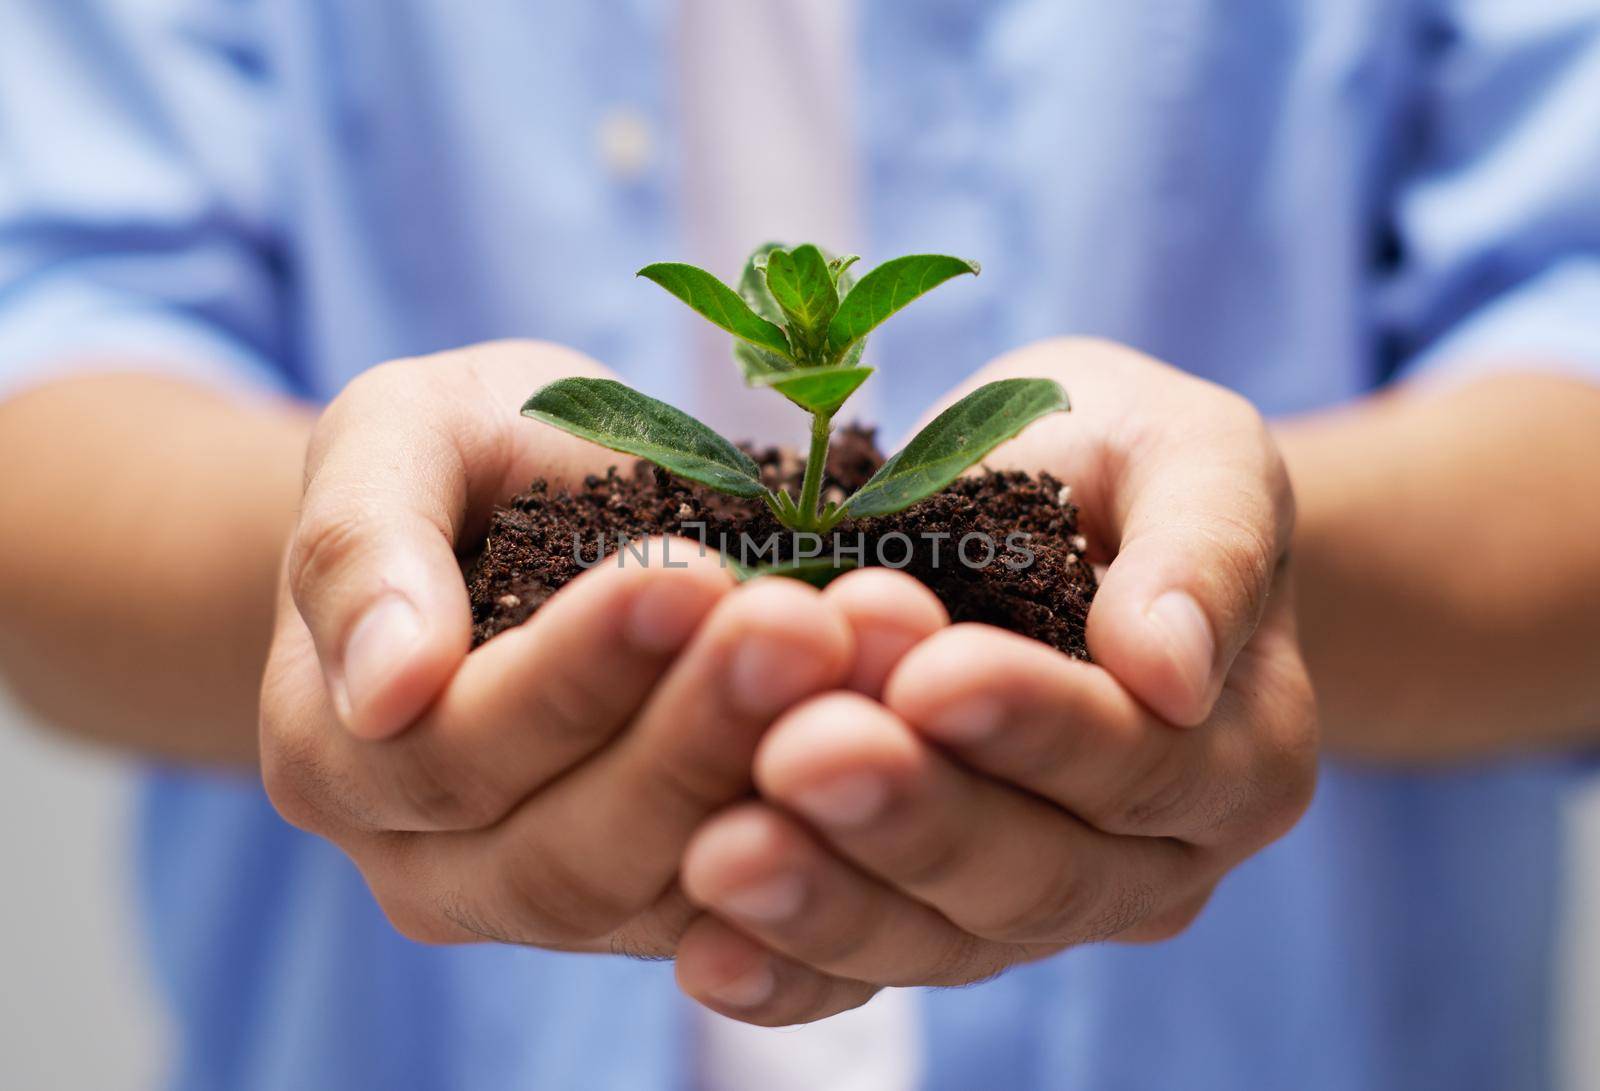 Nurturing new life. a person holding a pile of soil with a budding plant